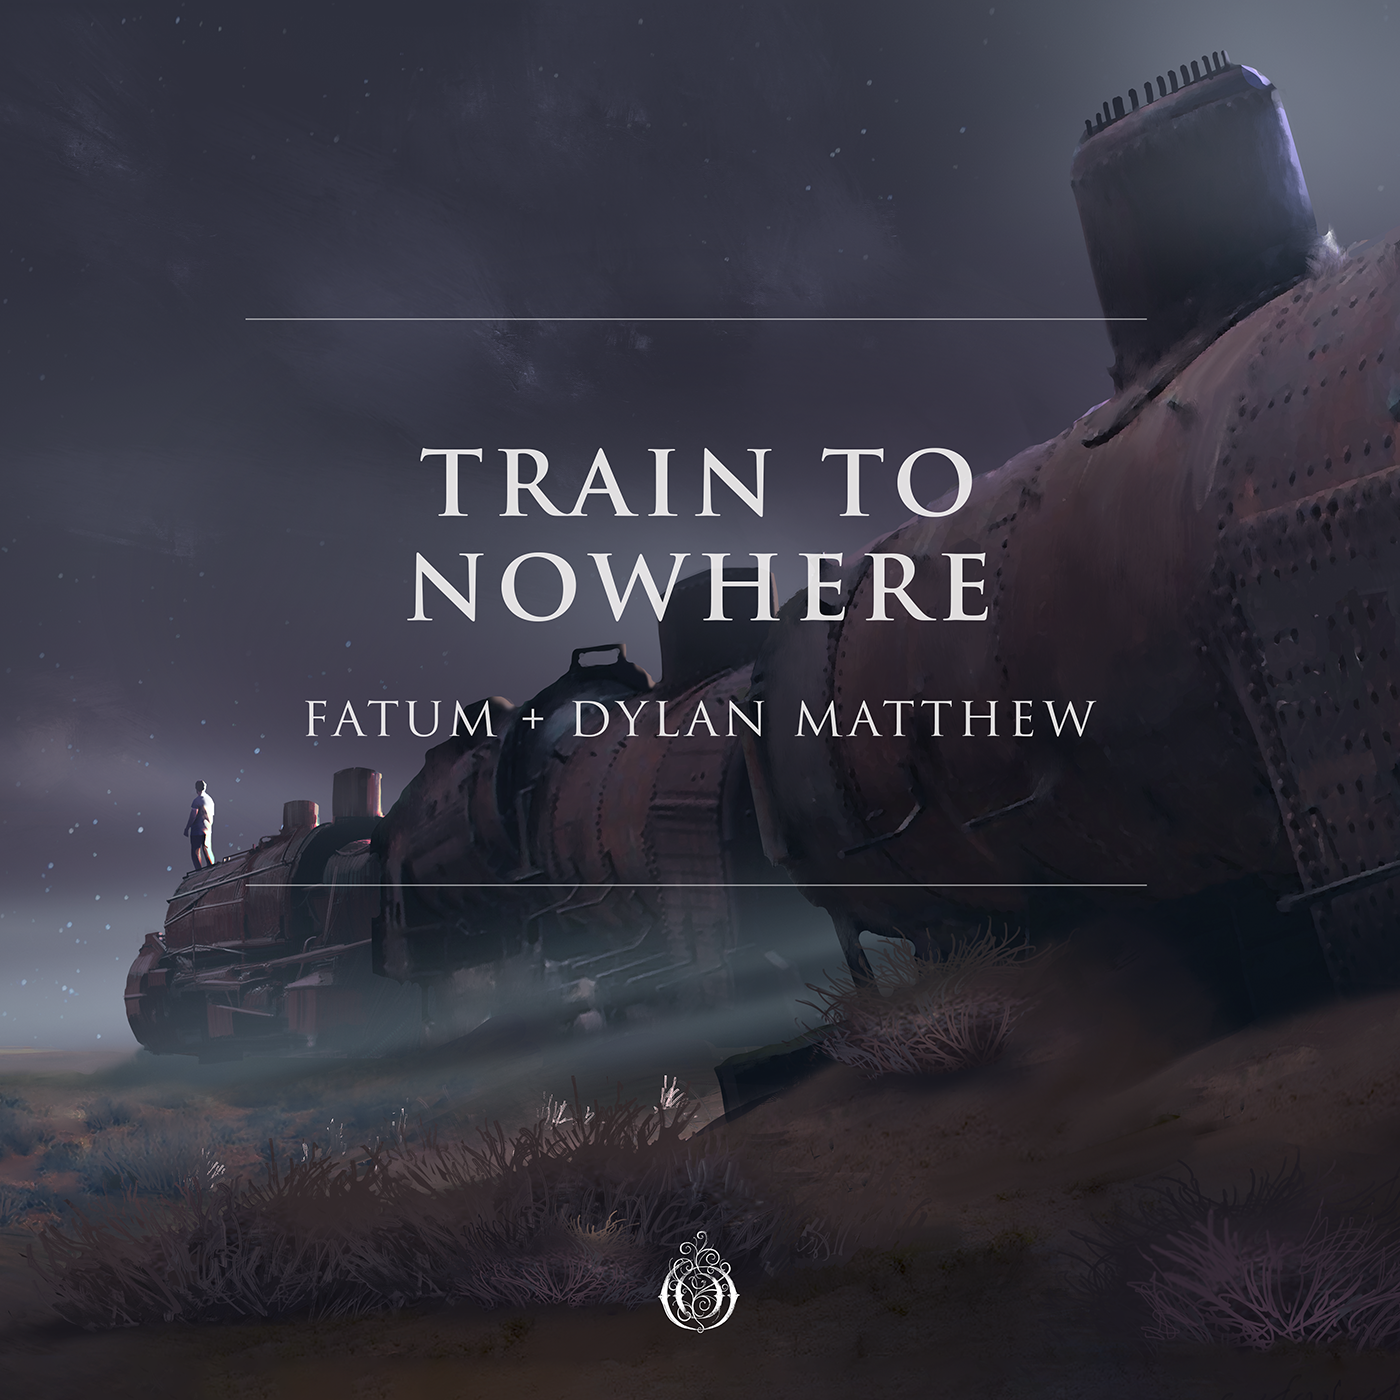 Fatum and Dylan Matthew Fuse Worlds as We Journey on a “Train to Nowhere”